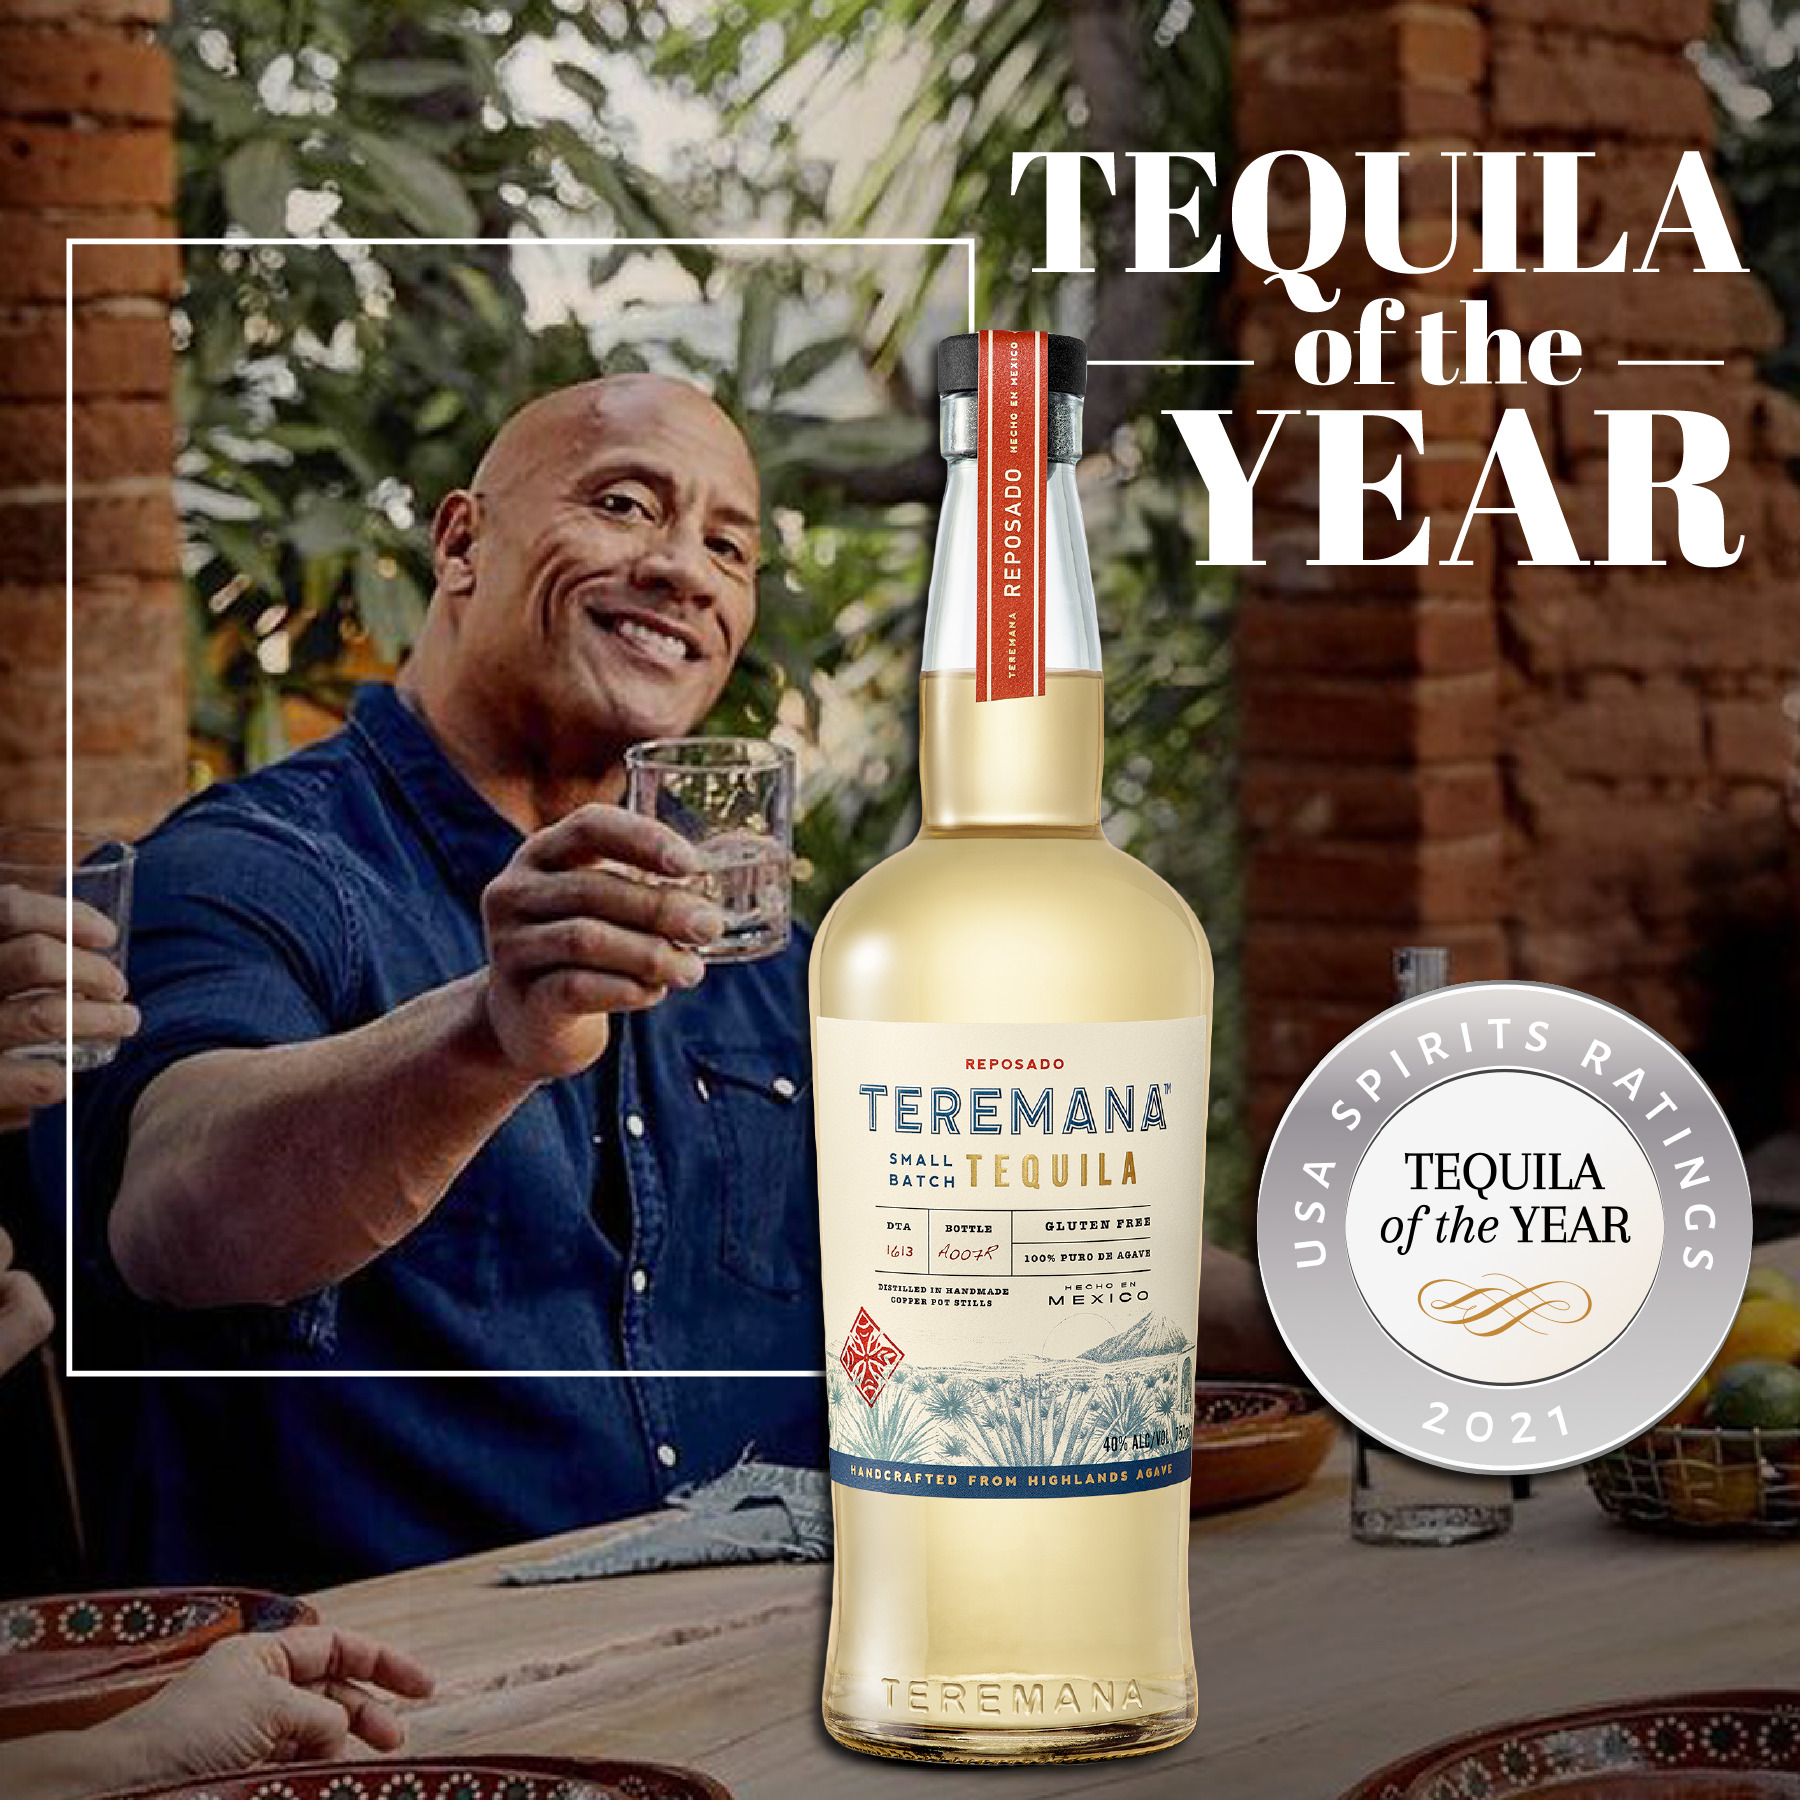 Tequila of the Year - Teremana Tequila Reposado